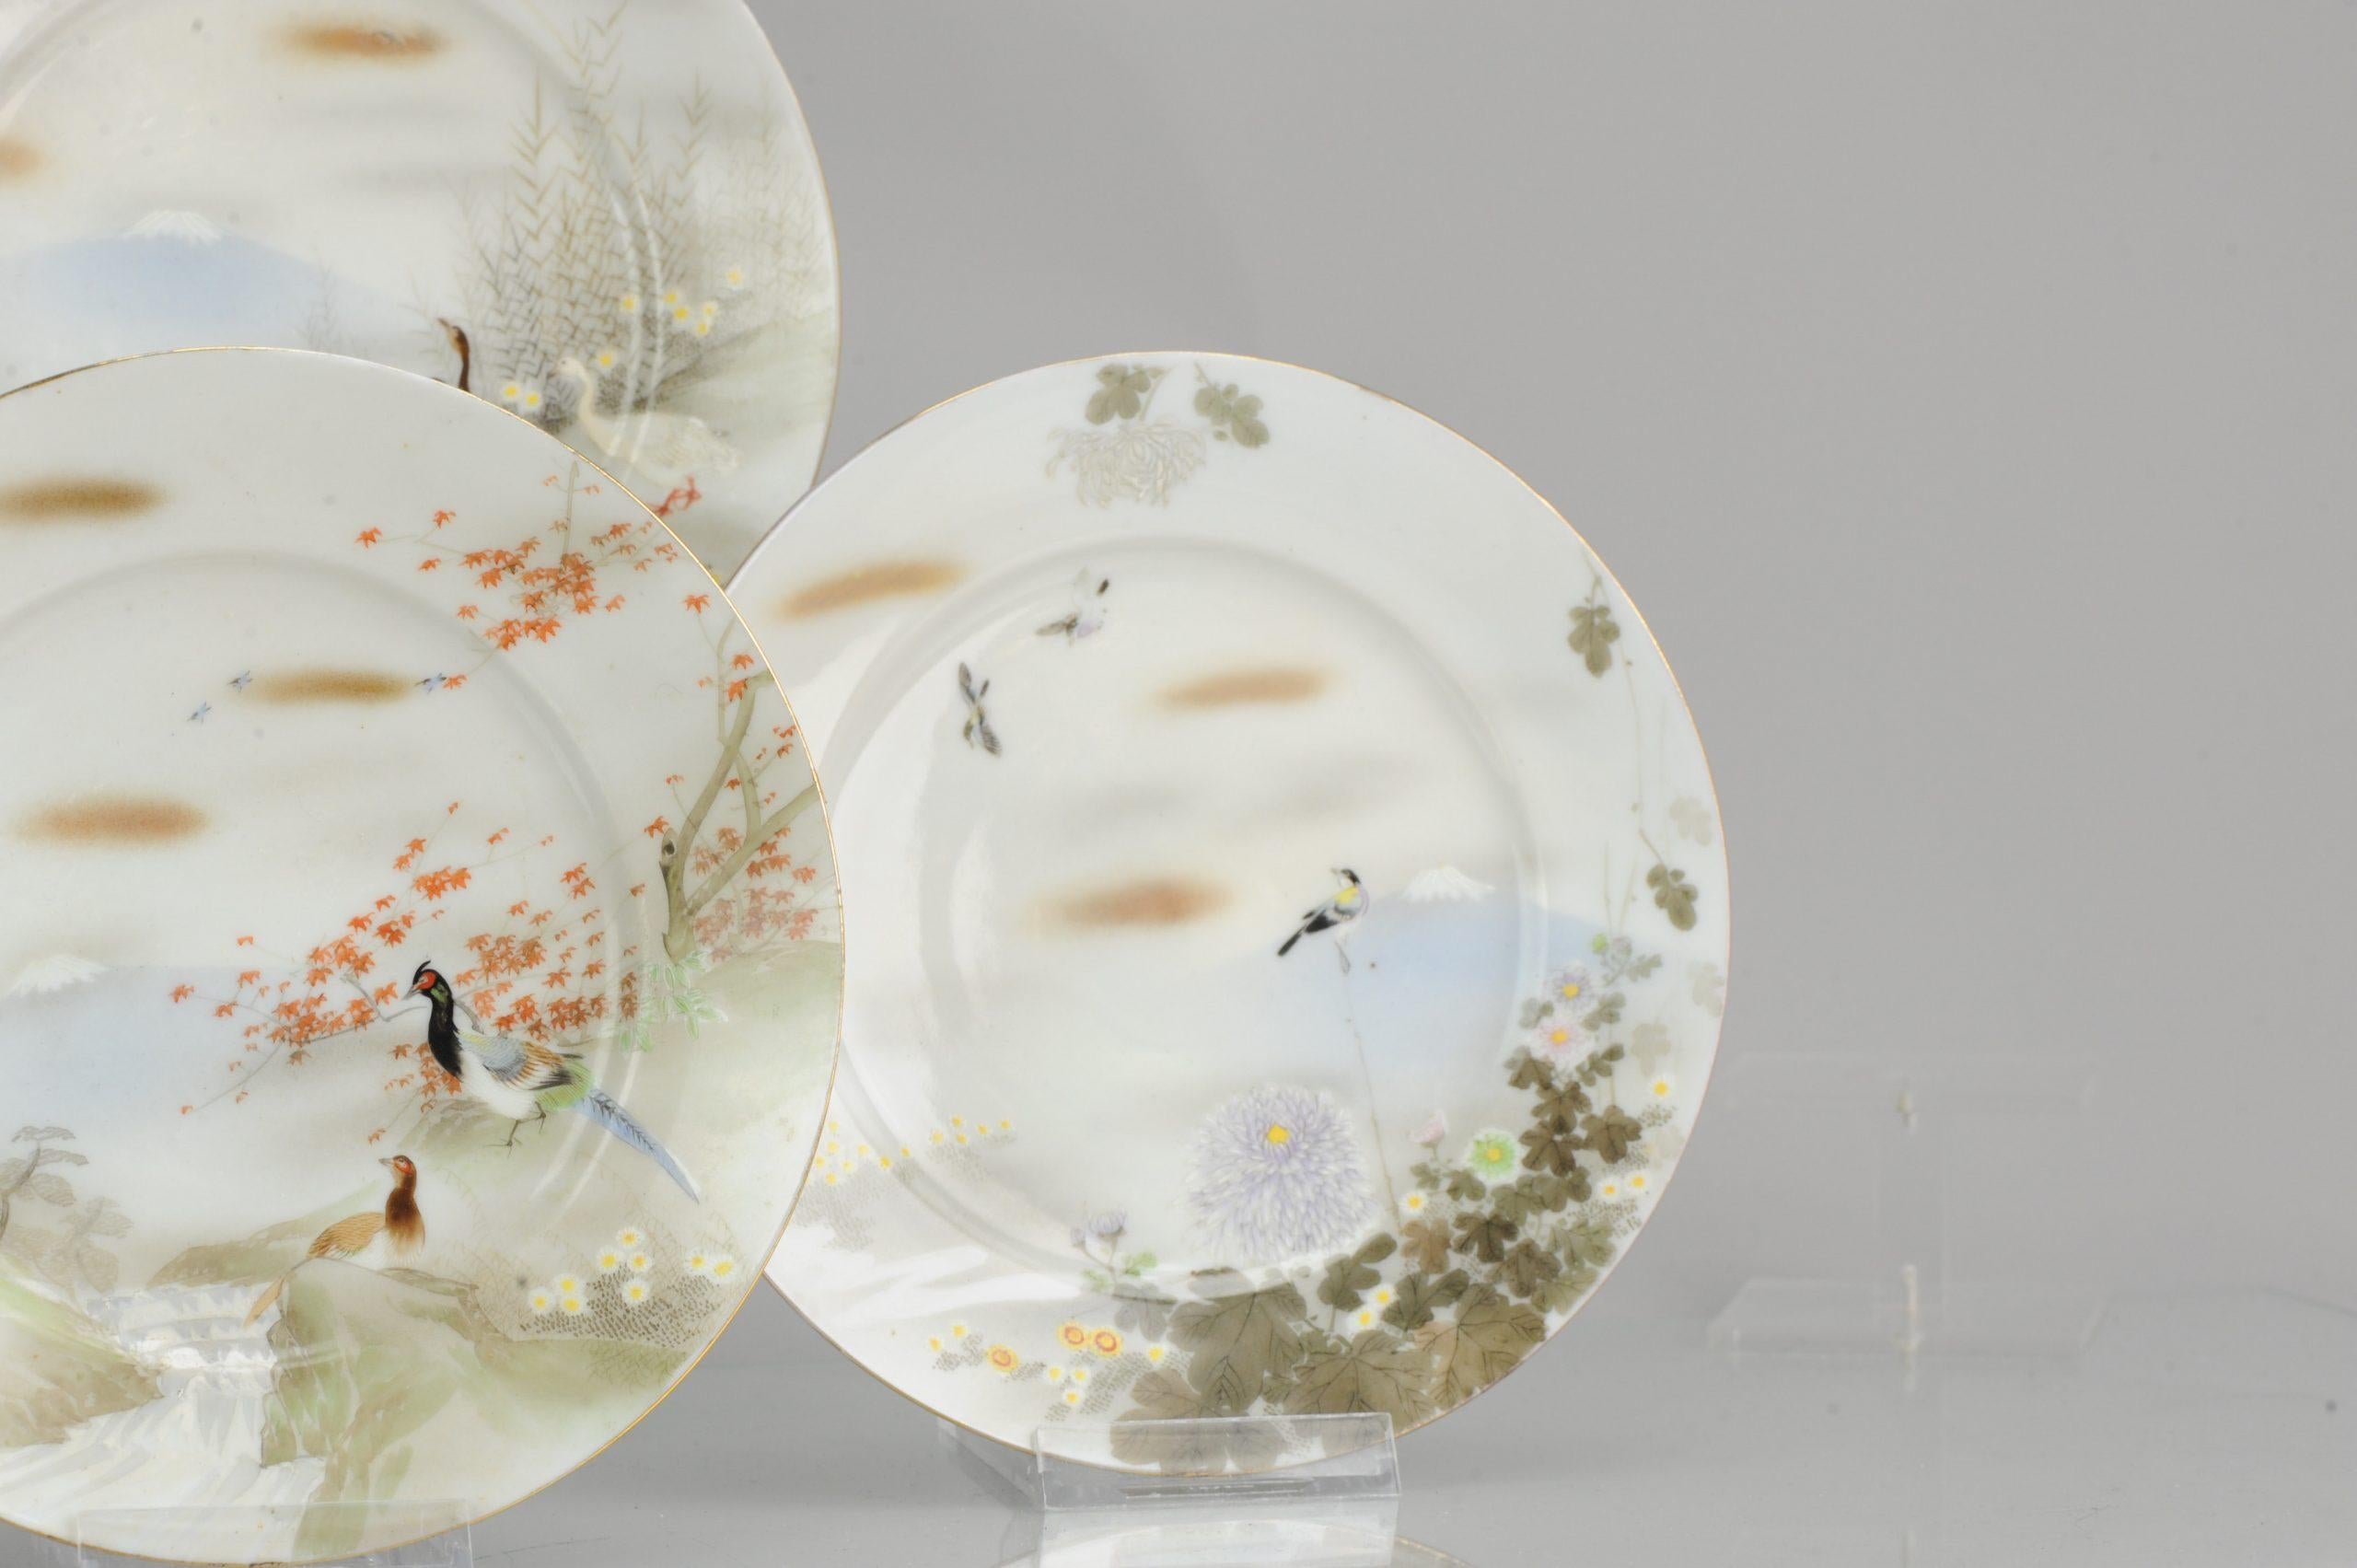 Eat your cakes or sandwiches in style with these lovley Japanes handpainted porcelain plates.

Additional information:
Material: Porcelain & Pottery
Type: Plates
Region of Origin: Japan
Period: 20th century
Condition: Perfect
Dimension: Ø 18.9 cm